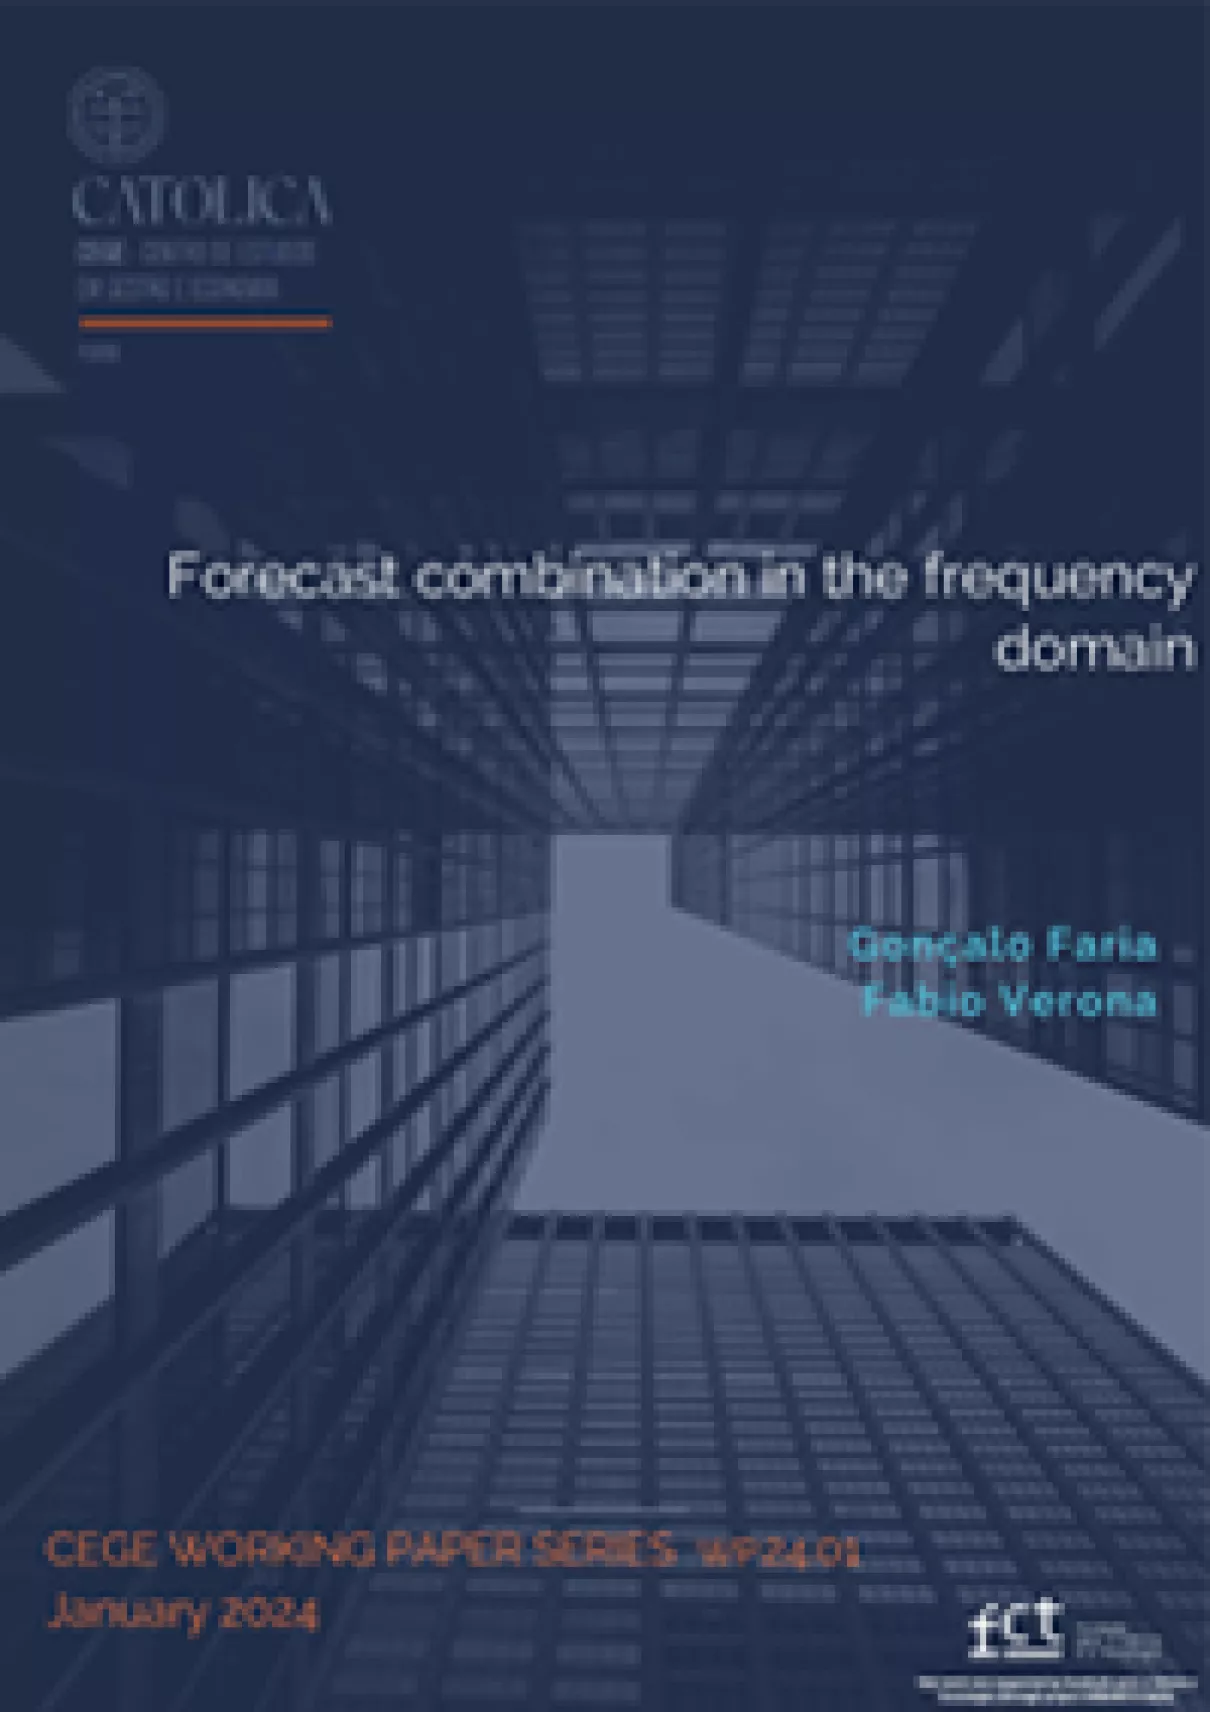 Forecast combination in the frequency domain